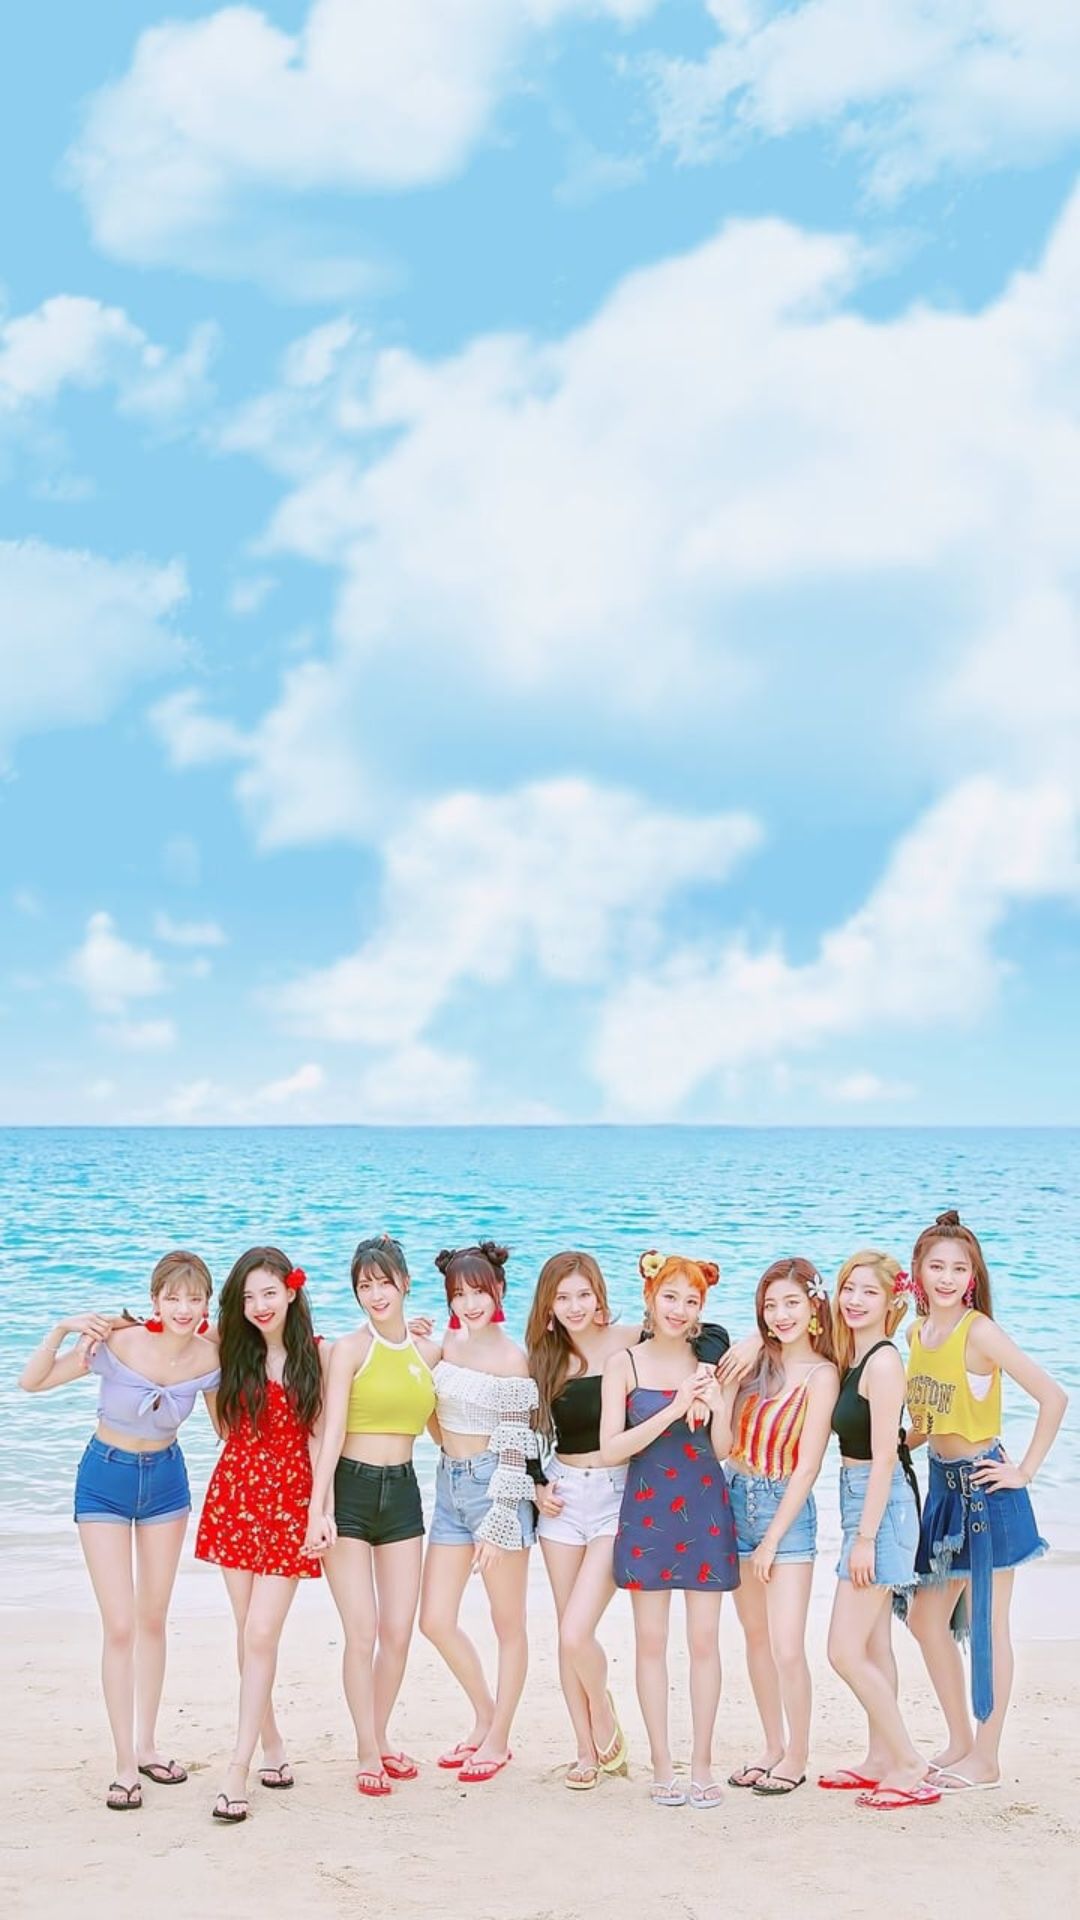 Twice Pictures Wallpaper